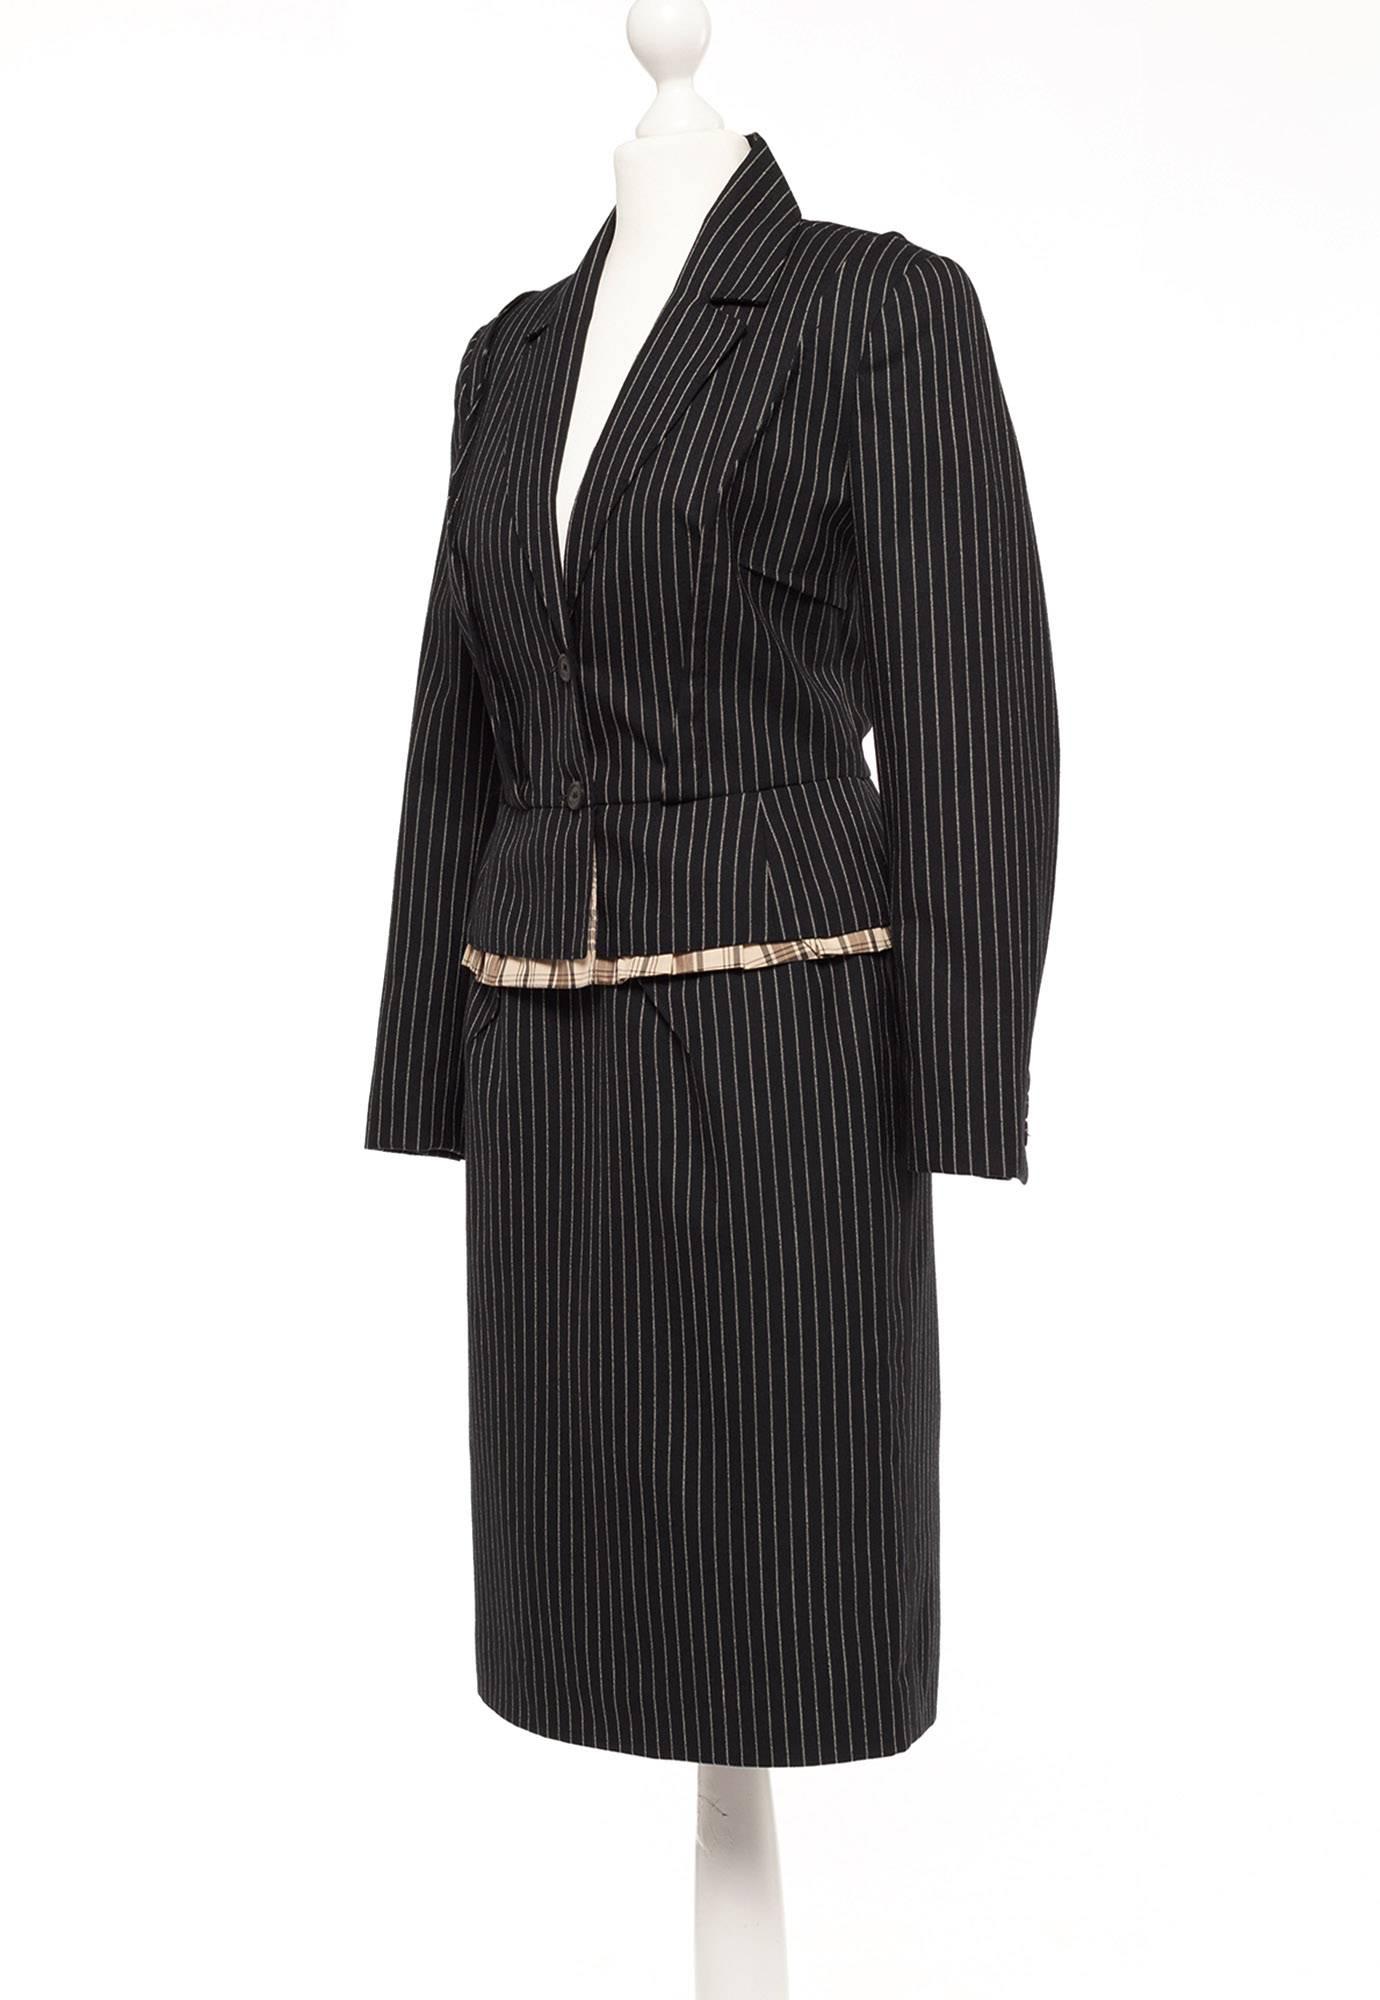 Blazer is cut above hip with peplum, shoulder dart details, Blazer in lined in a brown tone tartan plaid, slightly exposed at hip hem. luxurious fabric. Skirt is pencil shape, with interesting dart details front and back. 50's style with the Marc